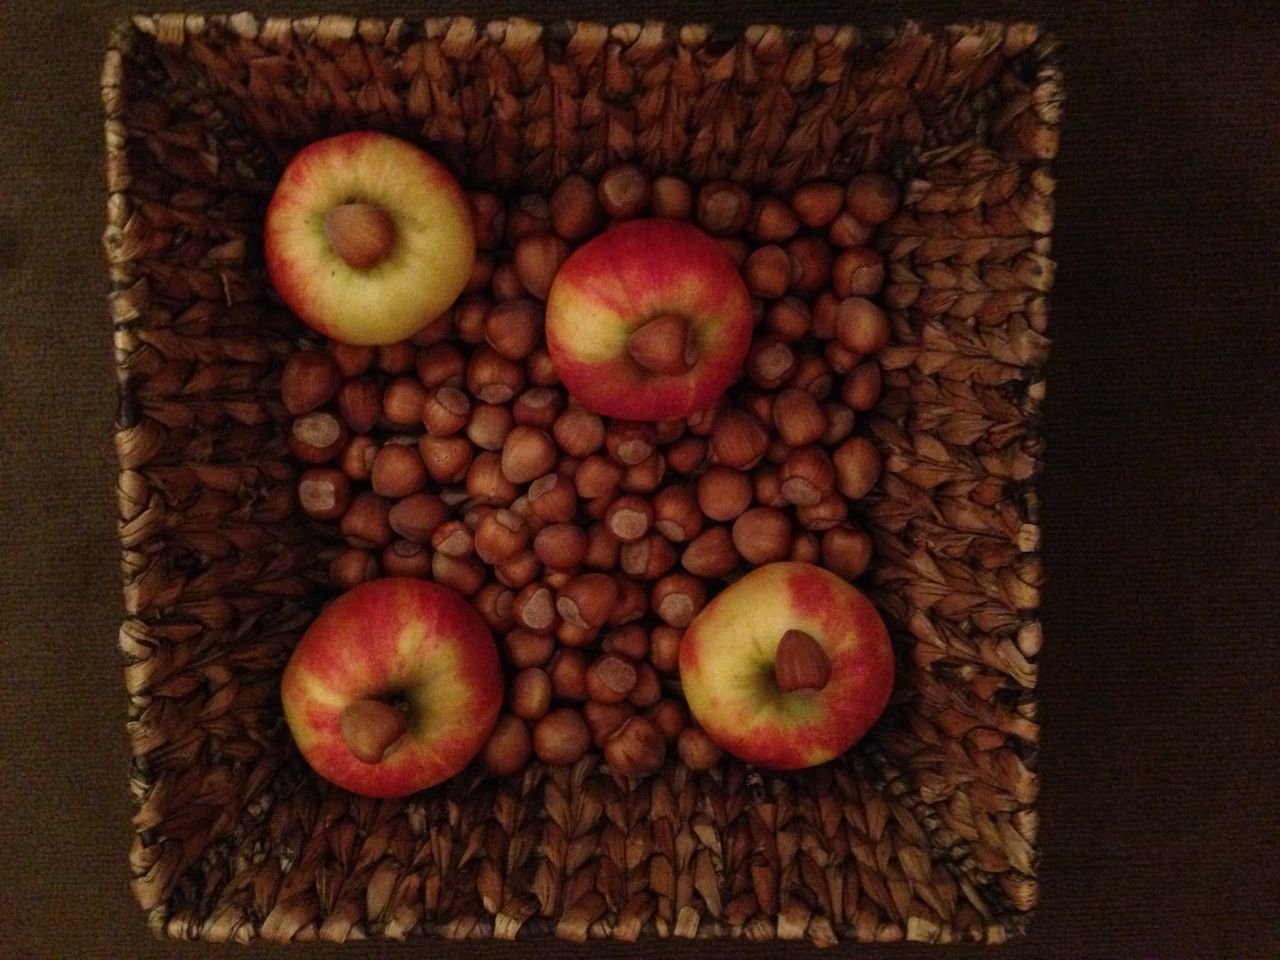 DIRECTLY ABOVE SHOT OF APPLES IN BASKET